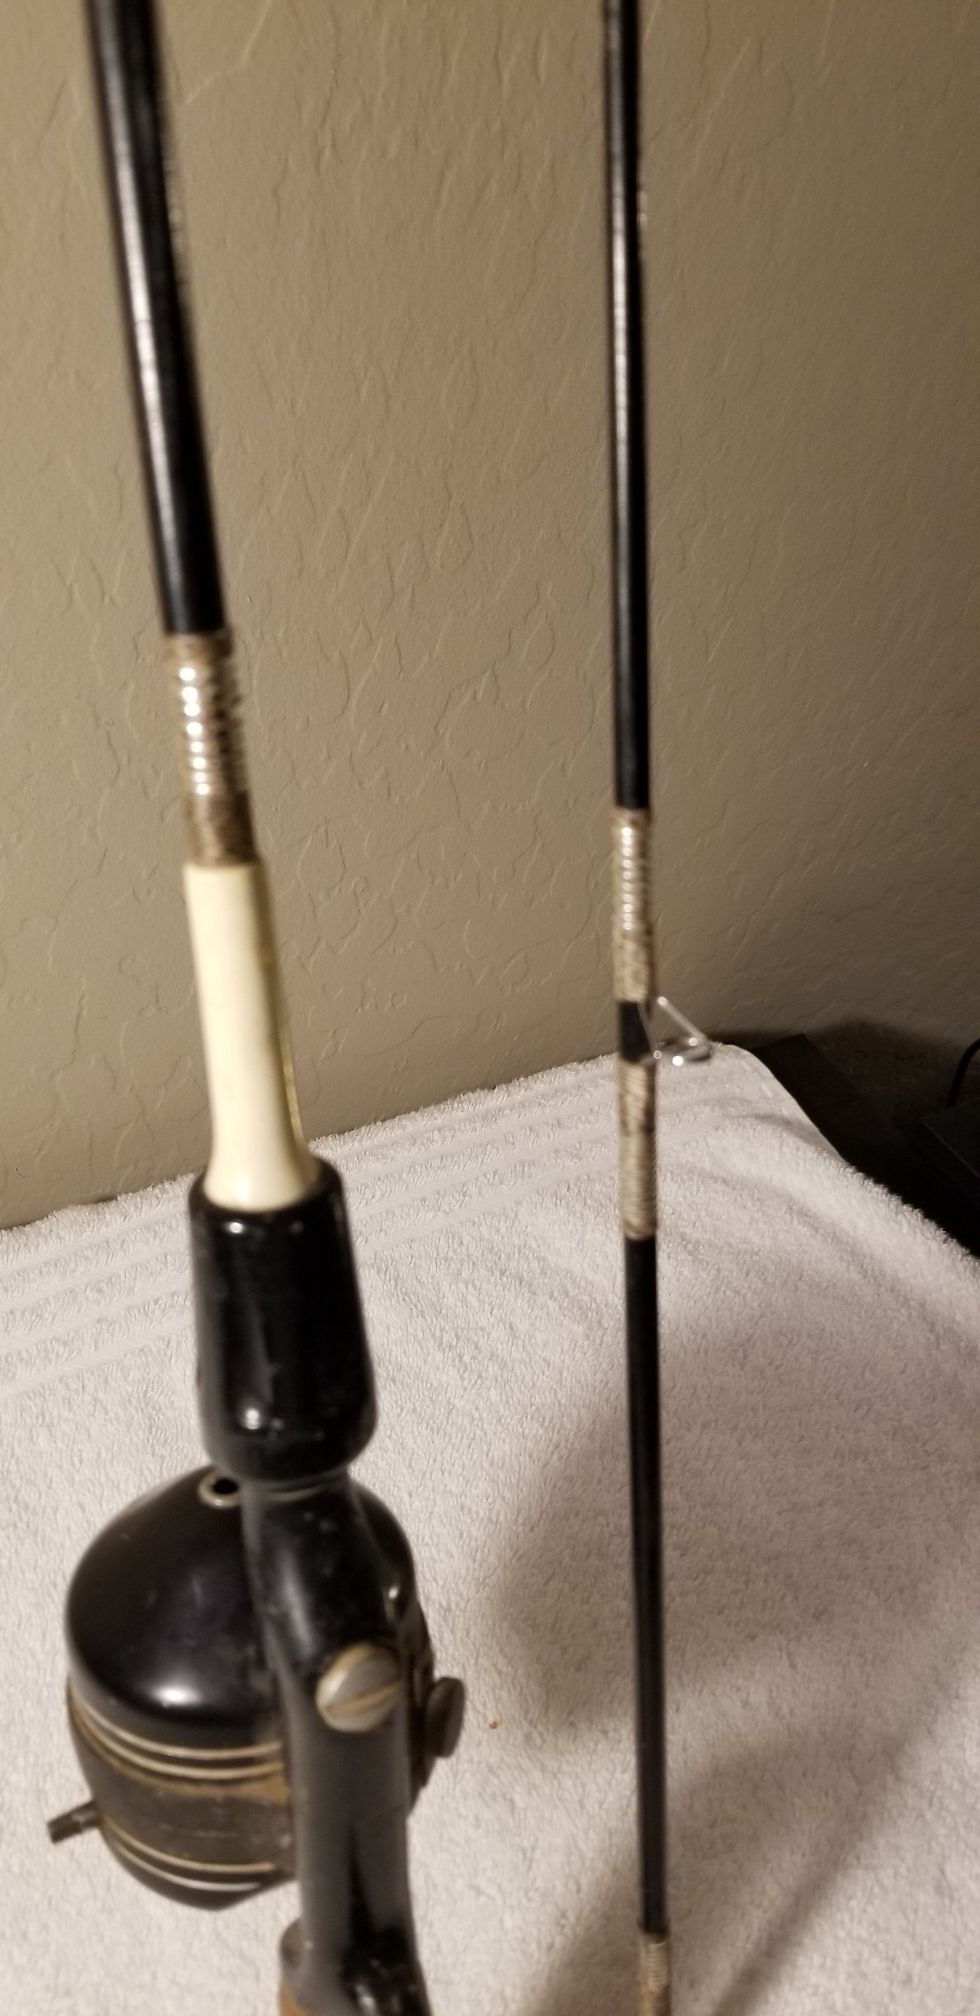 1977 zebco centennial rod and reel for Sale in Lakeland, FL - OfferUp